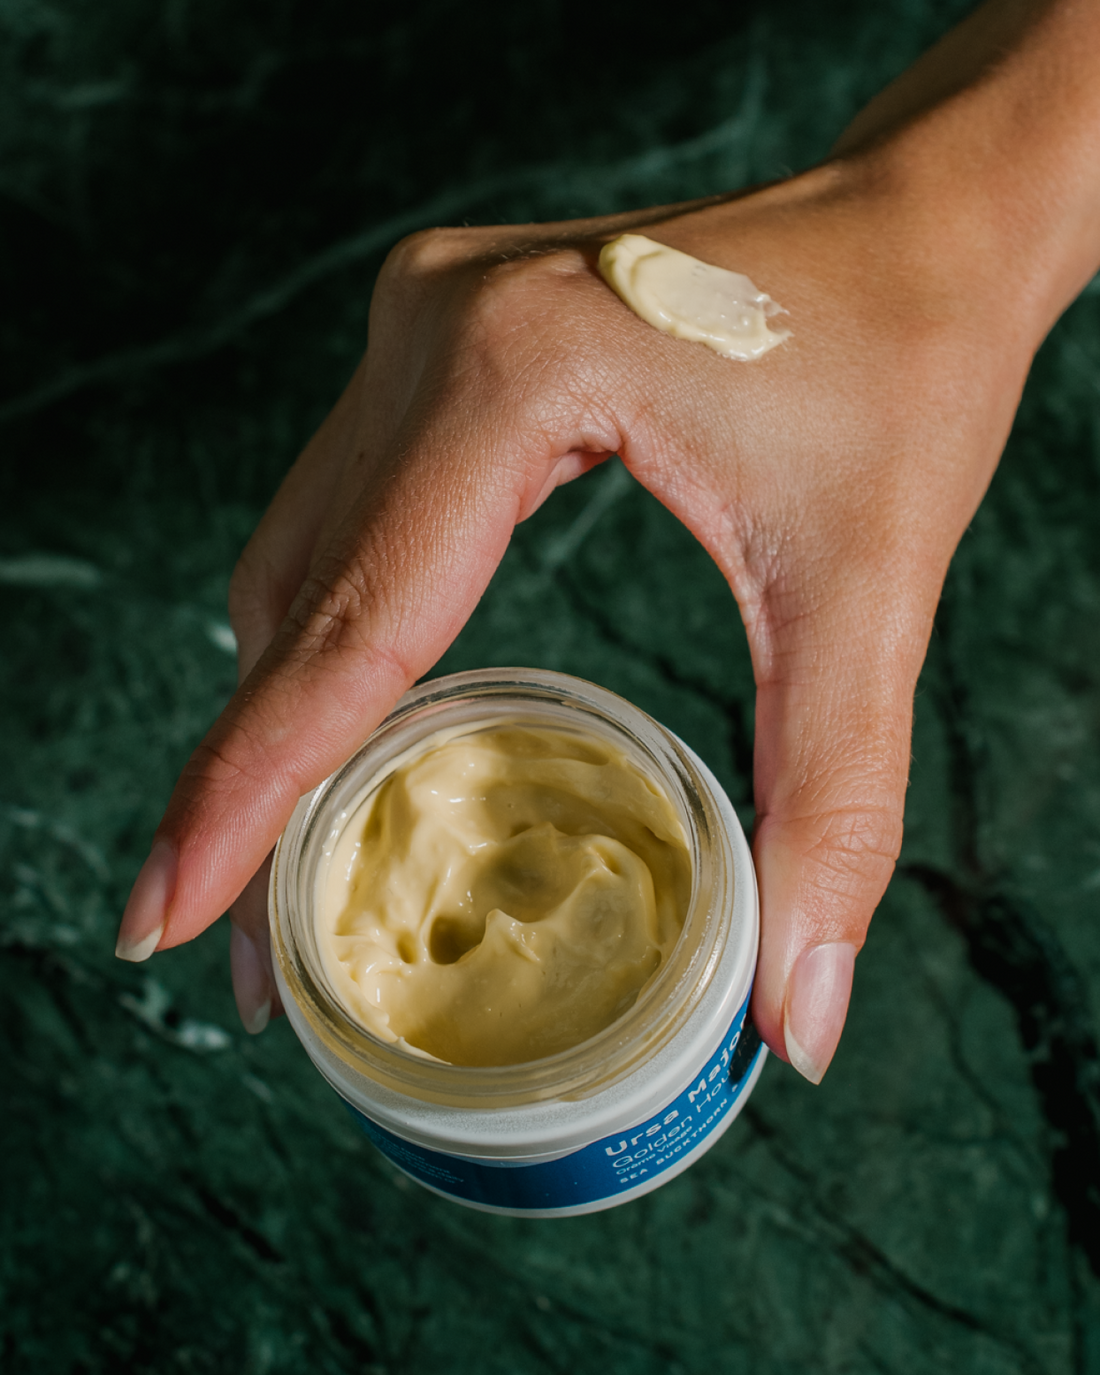 Holding an open Golden Hour Recovery Cream with a smear on hand.